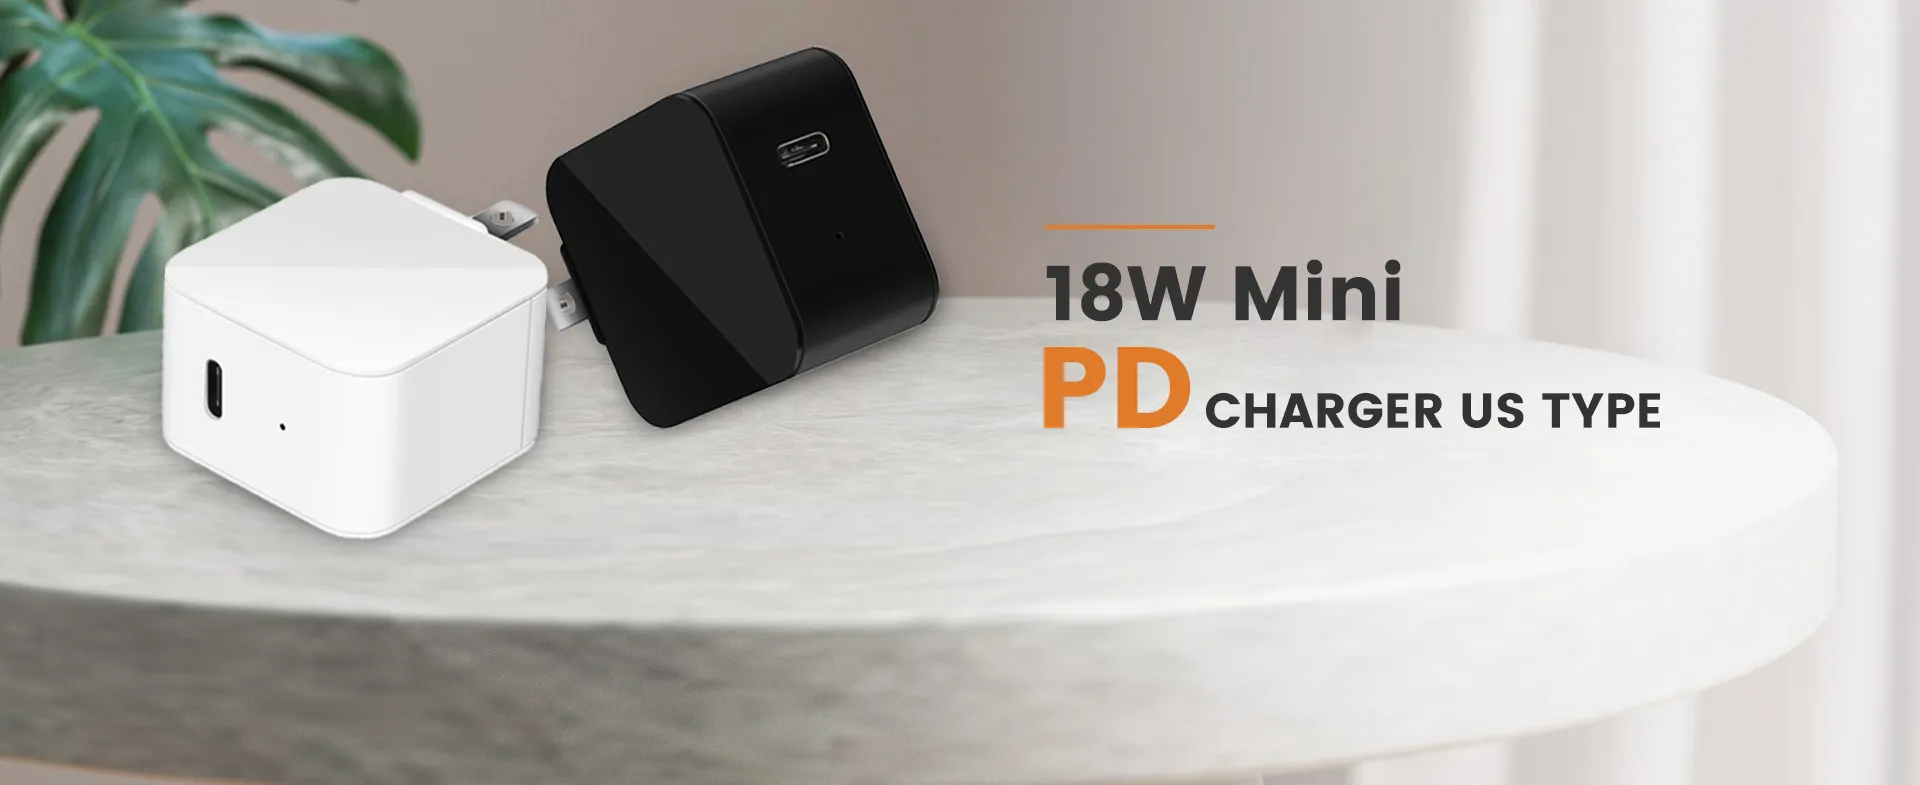 18W Mini PD Charger Us Type